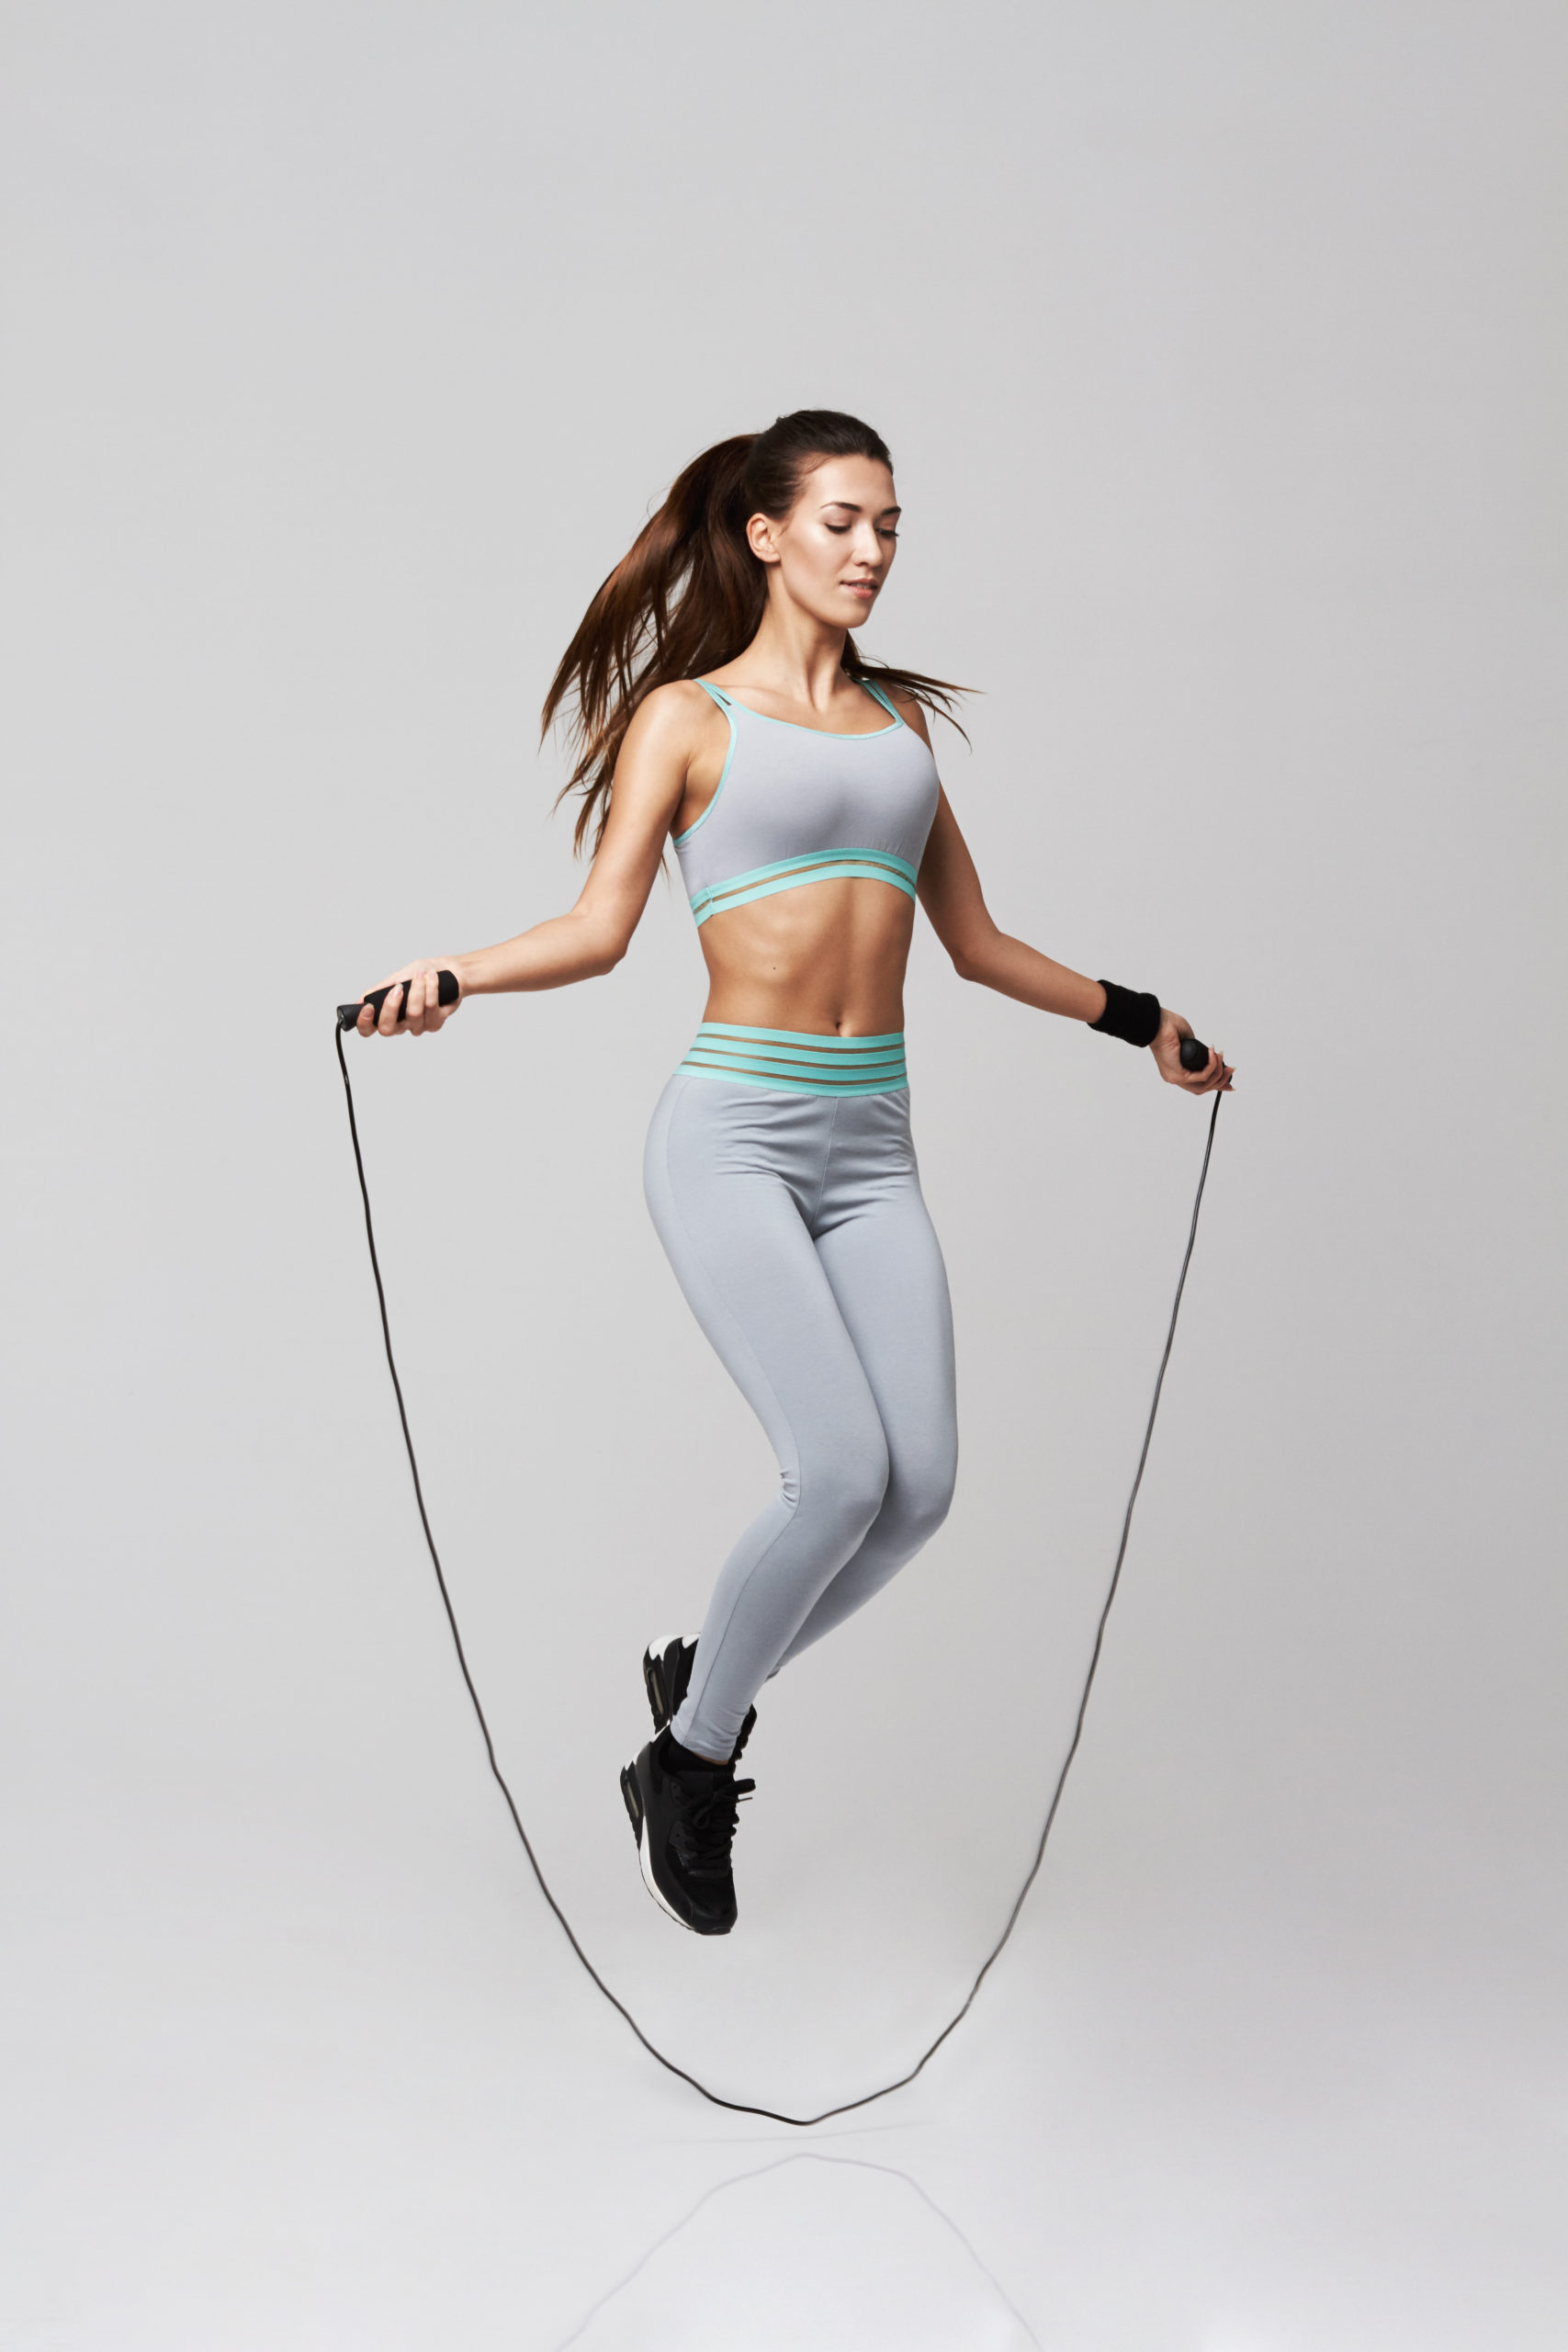 Rope Jumping: Fitness clothing and activewear, Jumping, Athletic body, Simple training. 1710x2560 HD Background.